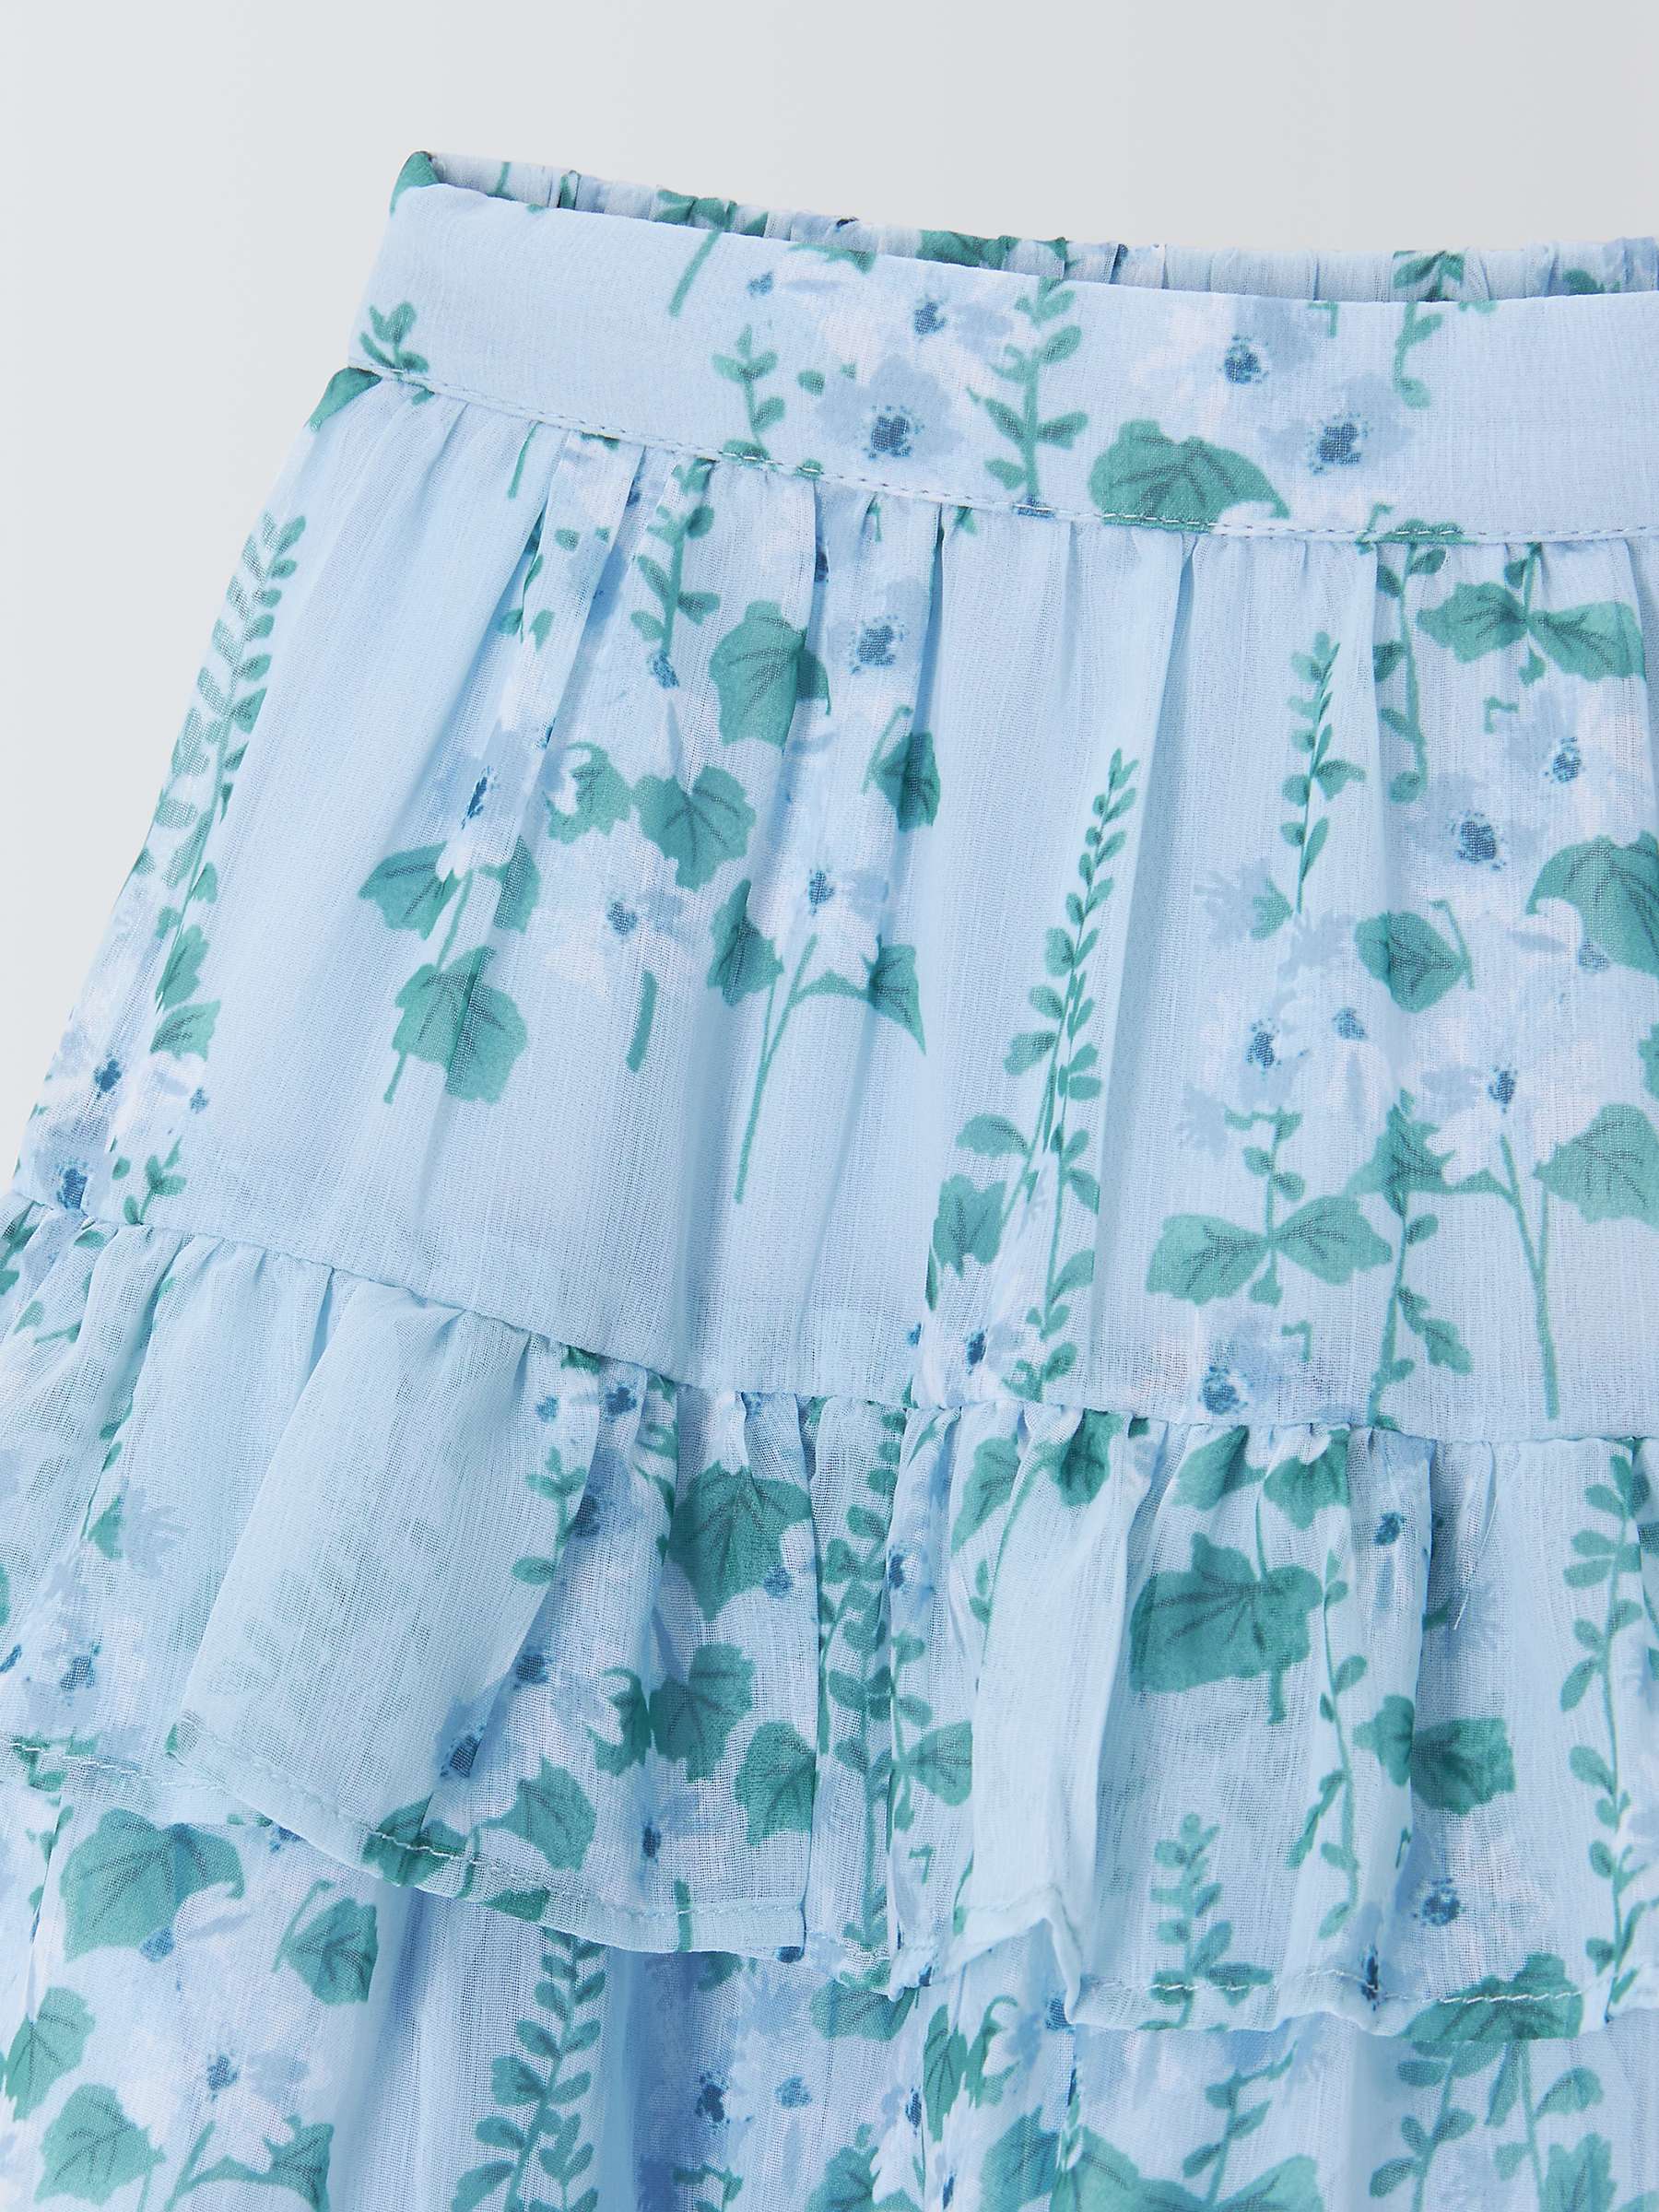 Buy John Lewis Heirloom Collection Kids' Floral Tiered Chiffon Skirt, Blue/White Online at johnlewis.com